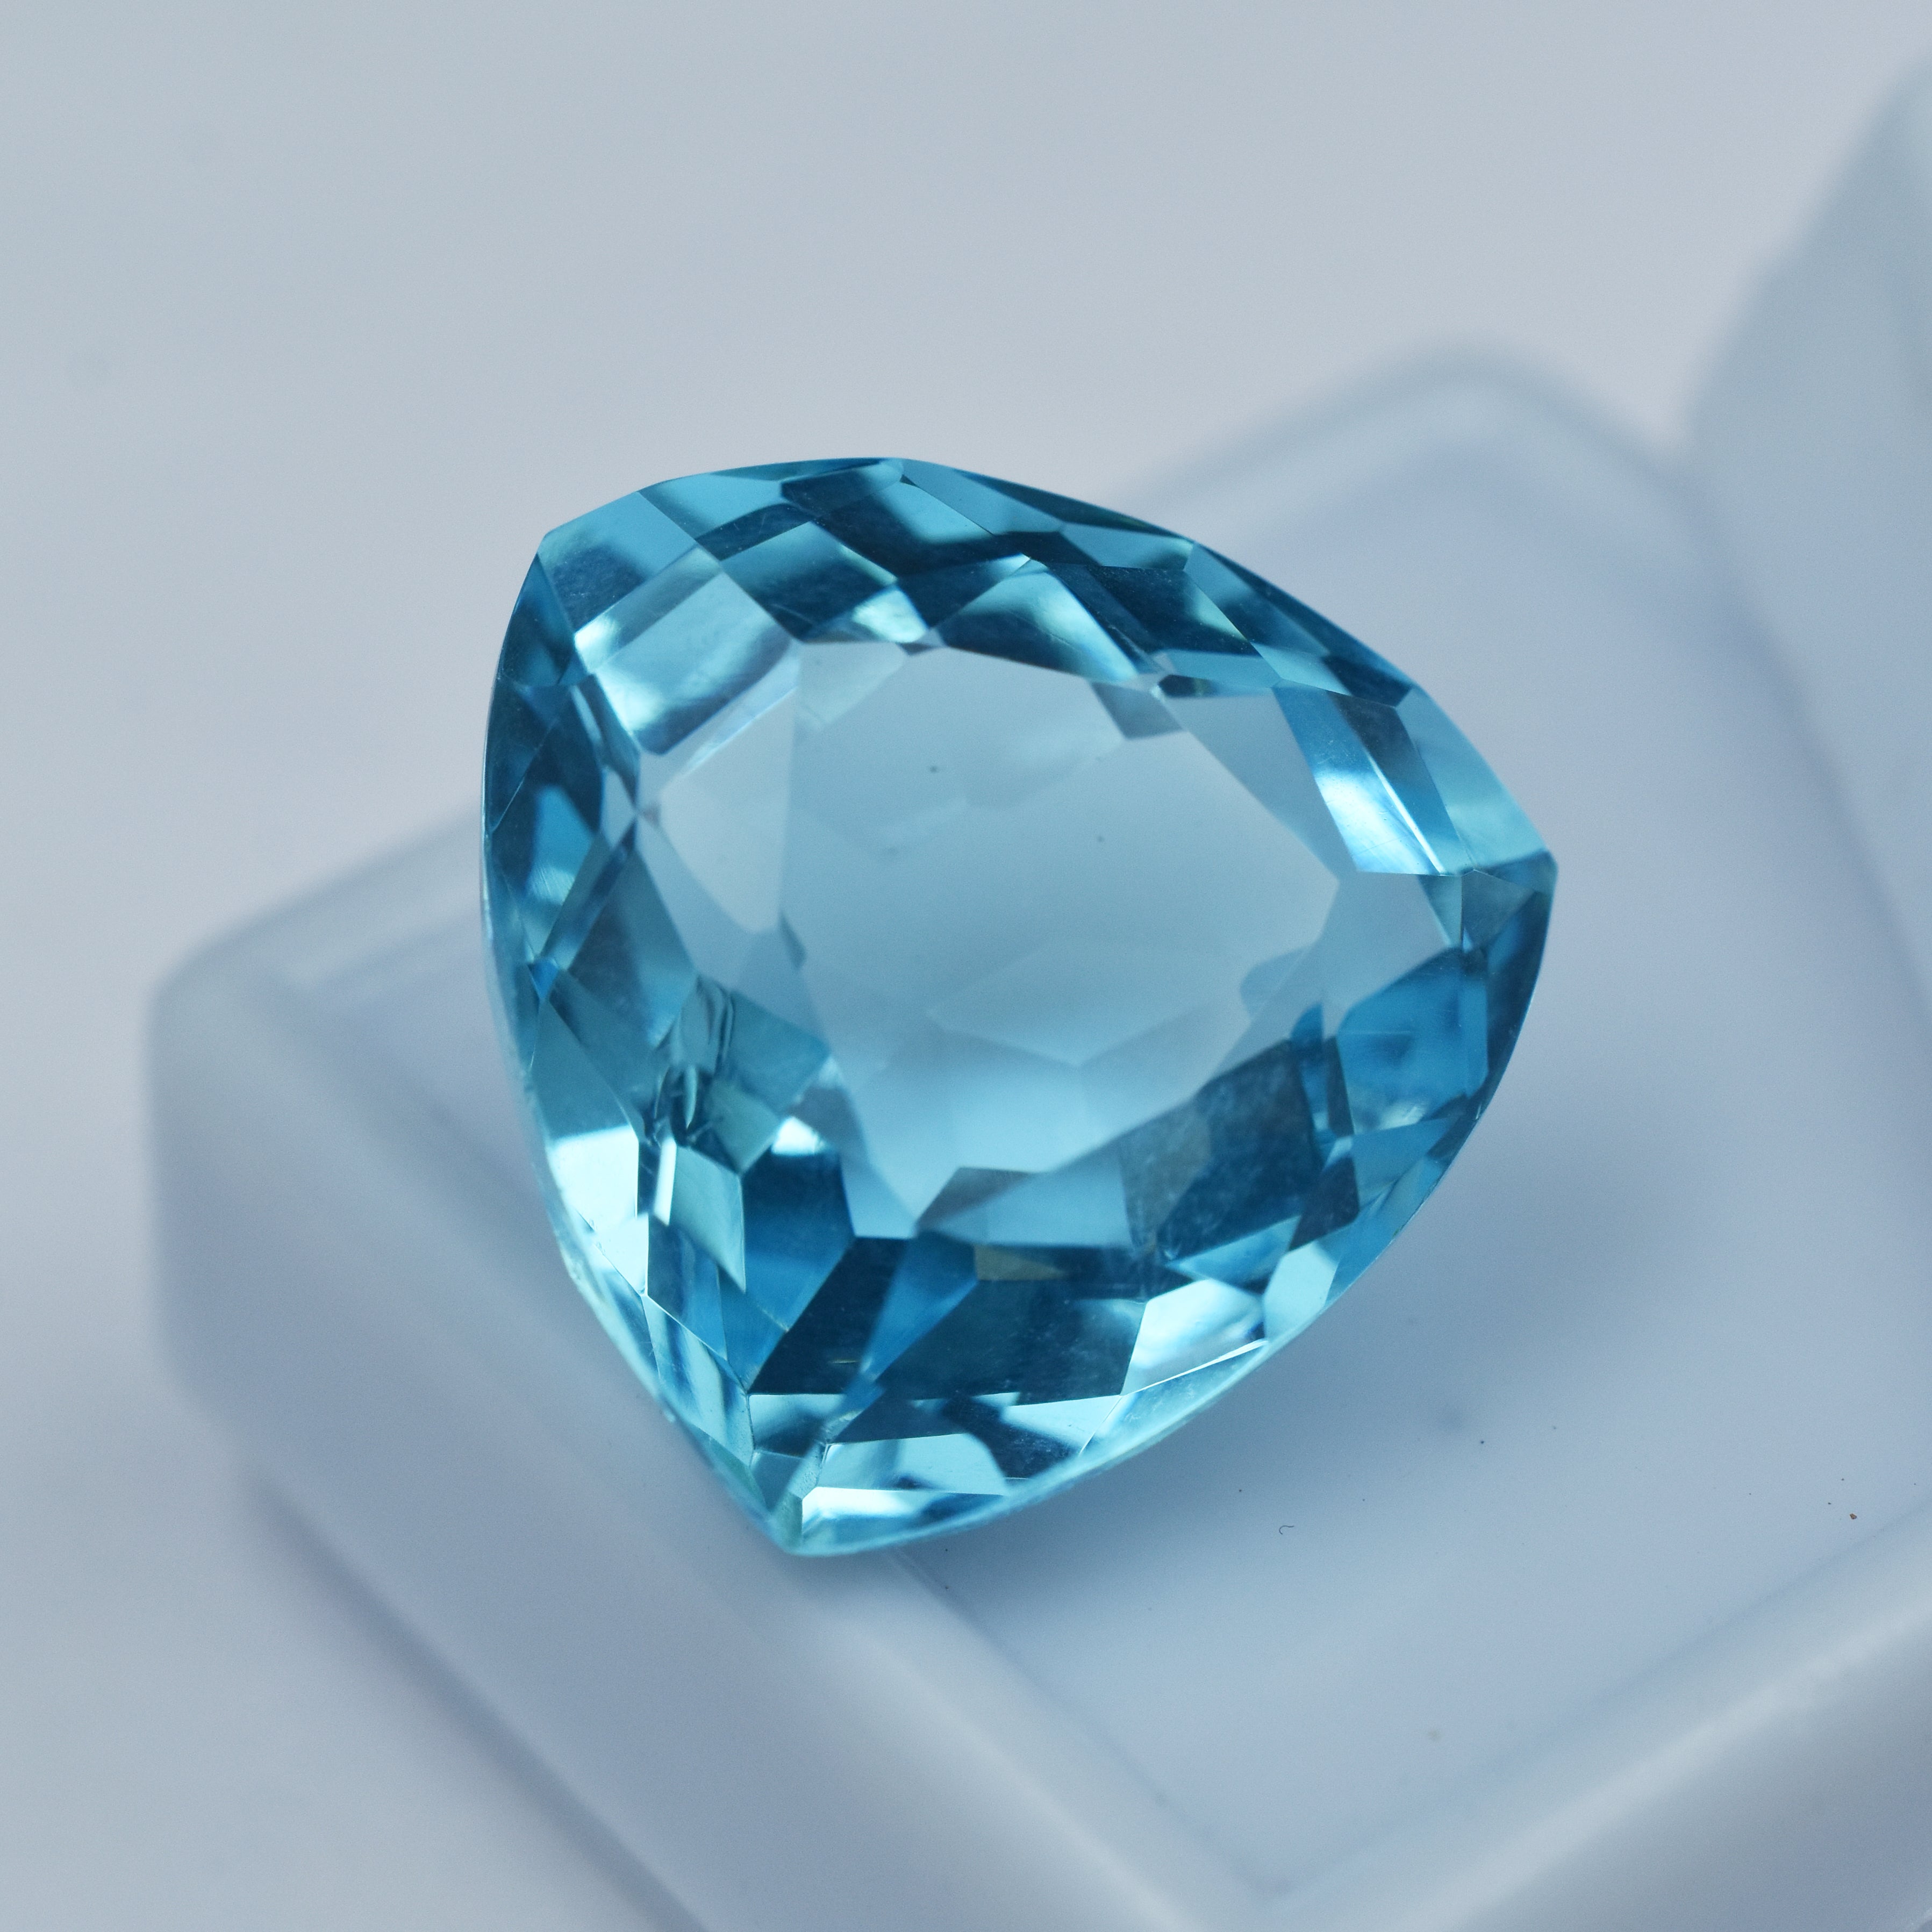 Hurry Up For Excellent Offer !! 12.99 Ct Trillion Cut Certified Natural Loose Gemstone Blue Aquamarine Gem |  Best For Calming and Soothing & Spiritual Growth